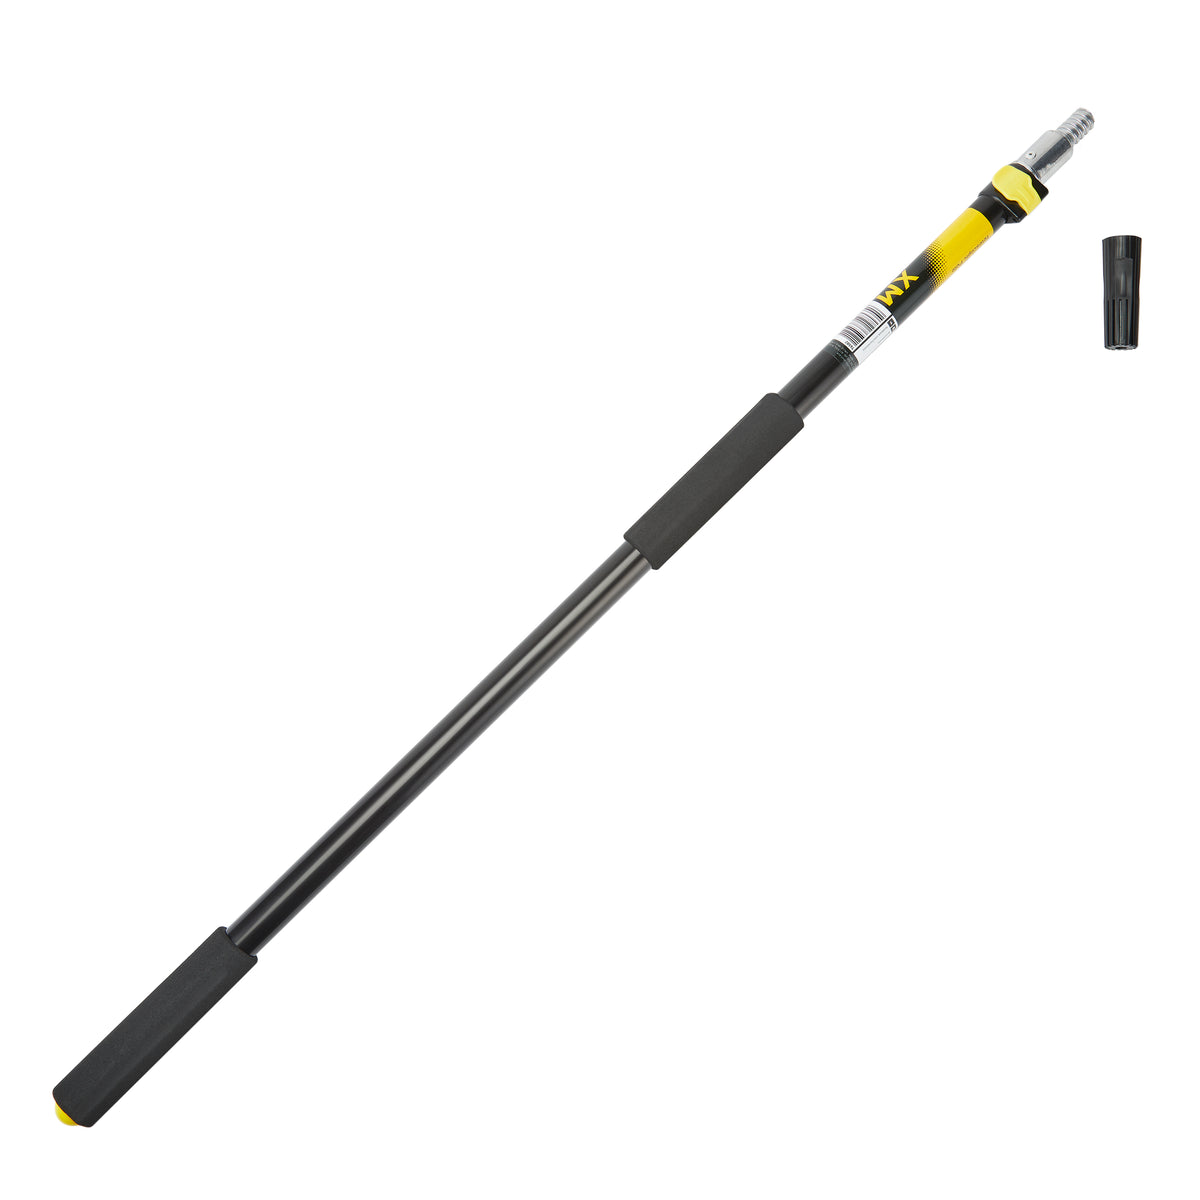  EVERSPROUT 7-to-24 Foot Telescopic Extension Pole